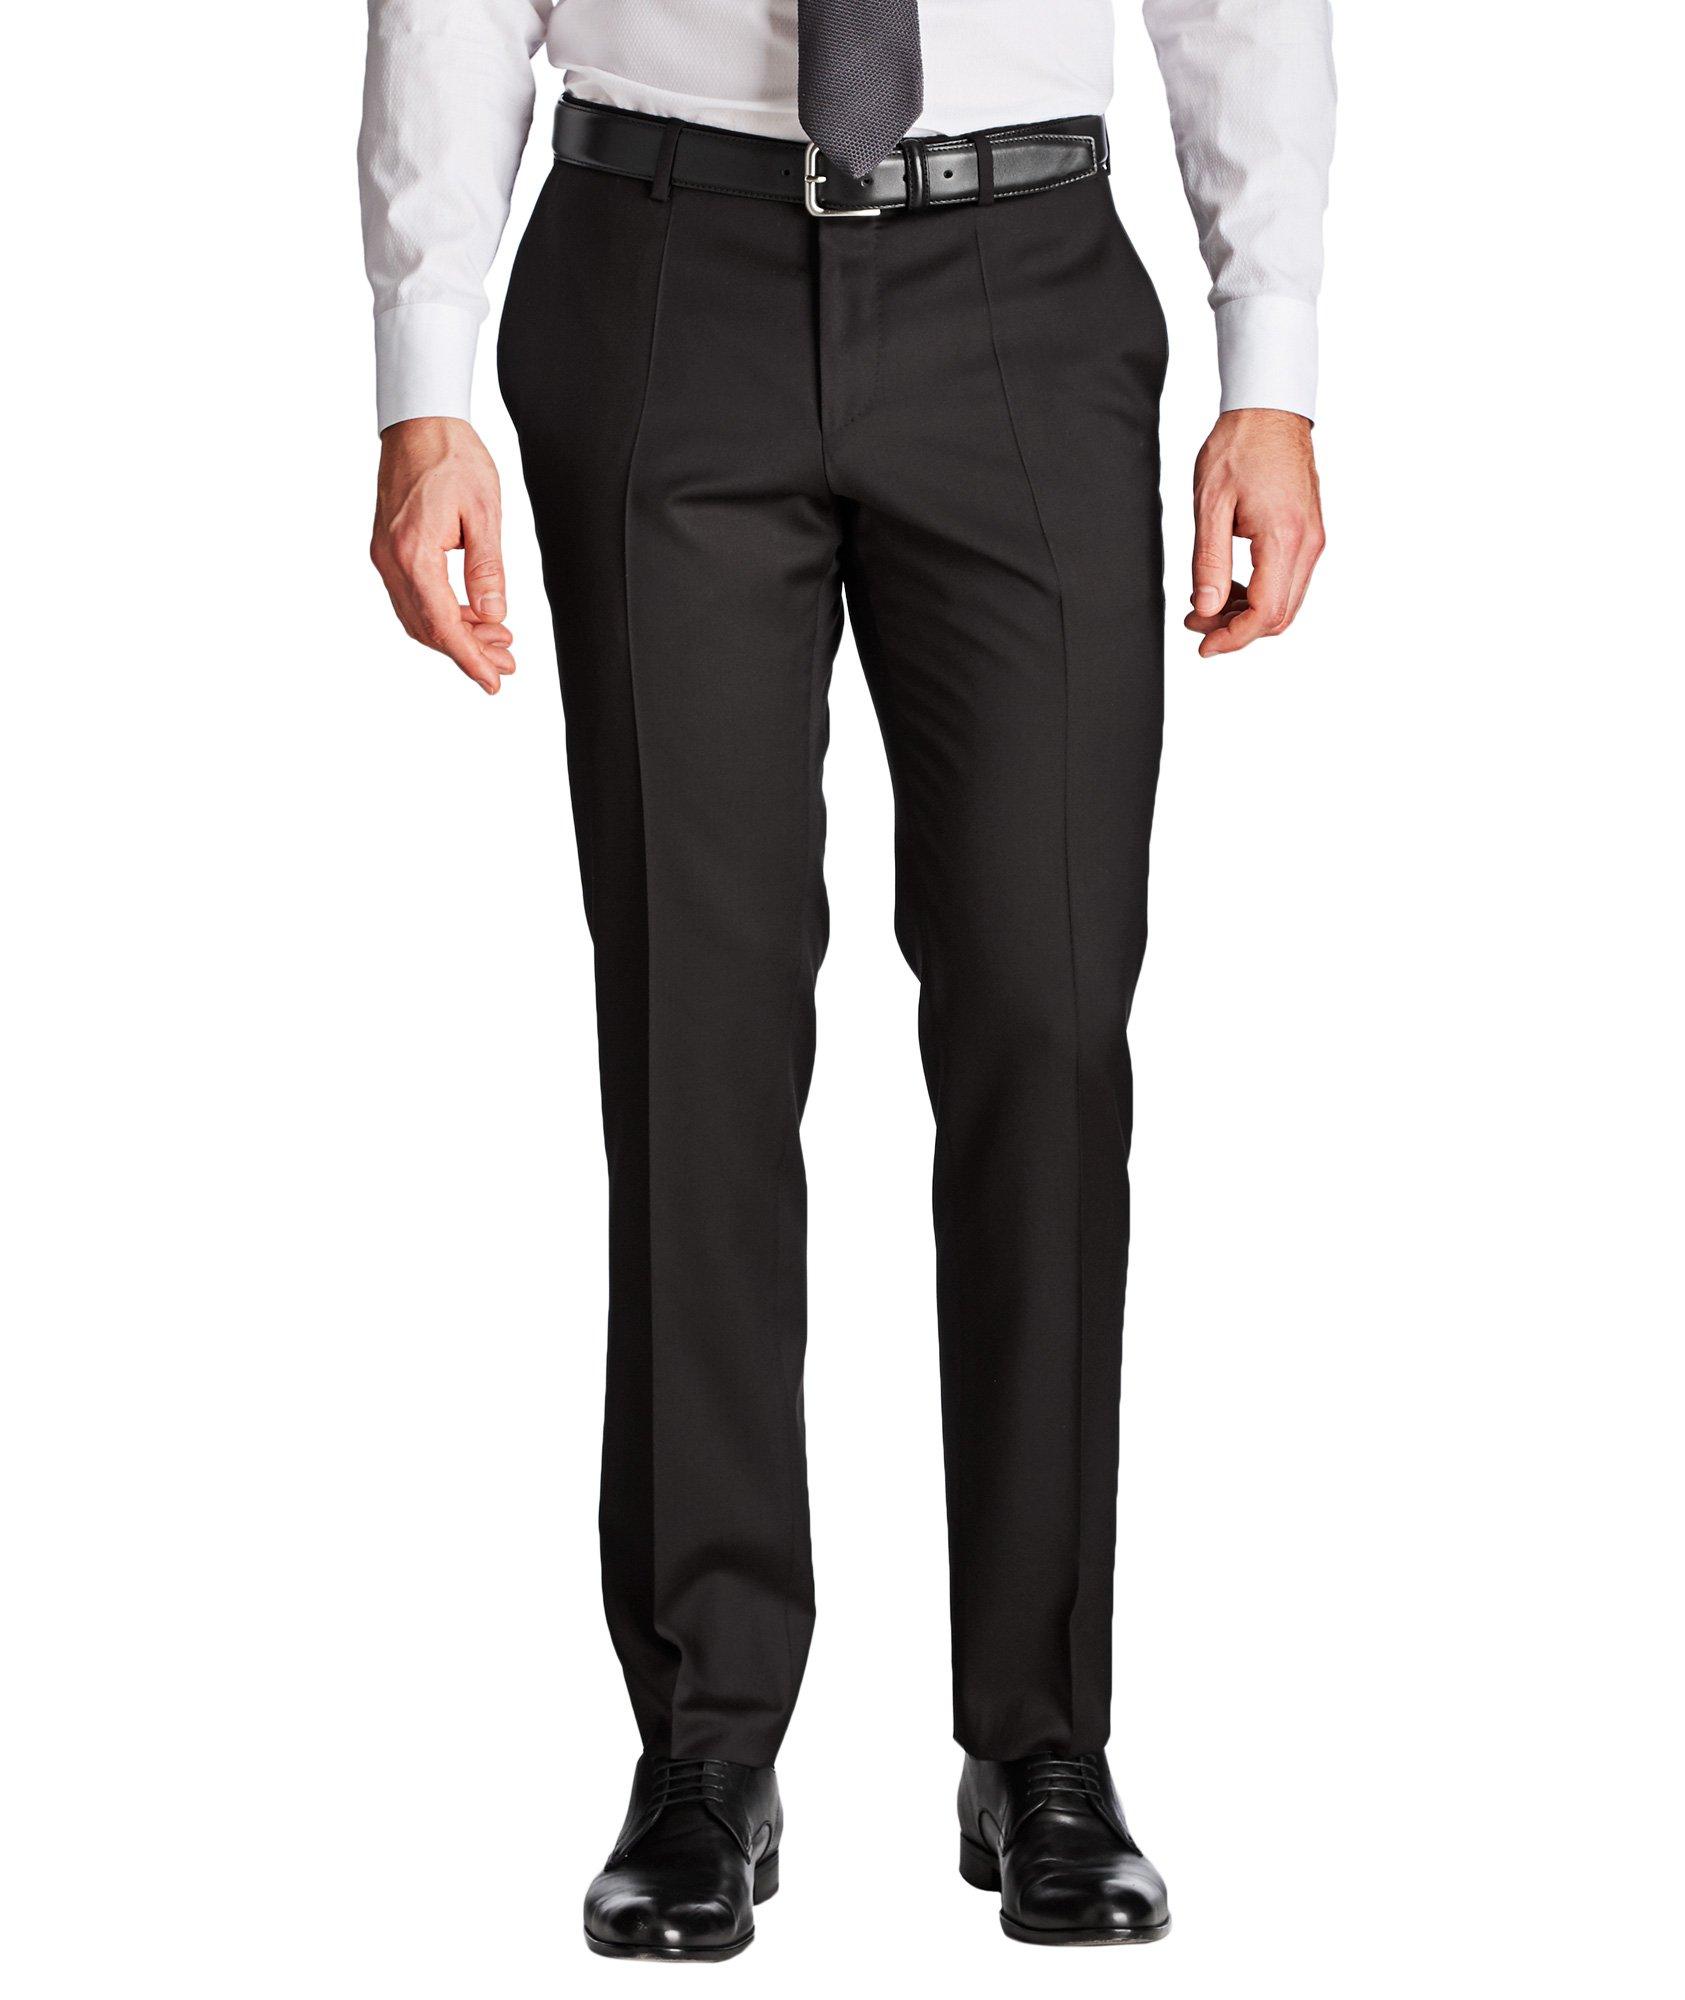 Gibson "Create Your Look" Dress Pants  image 0